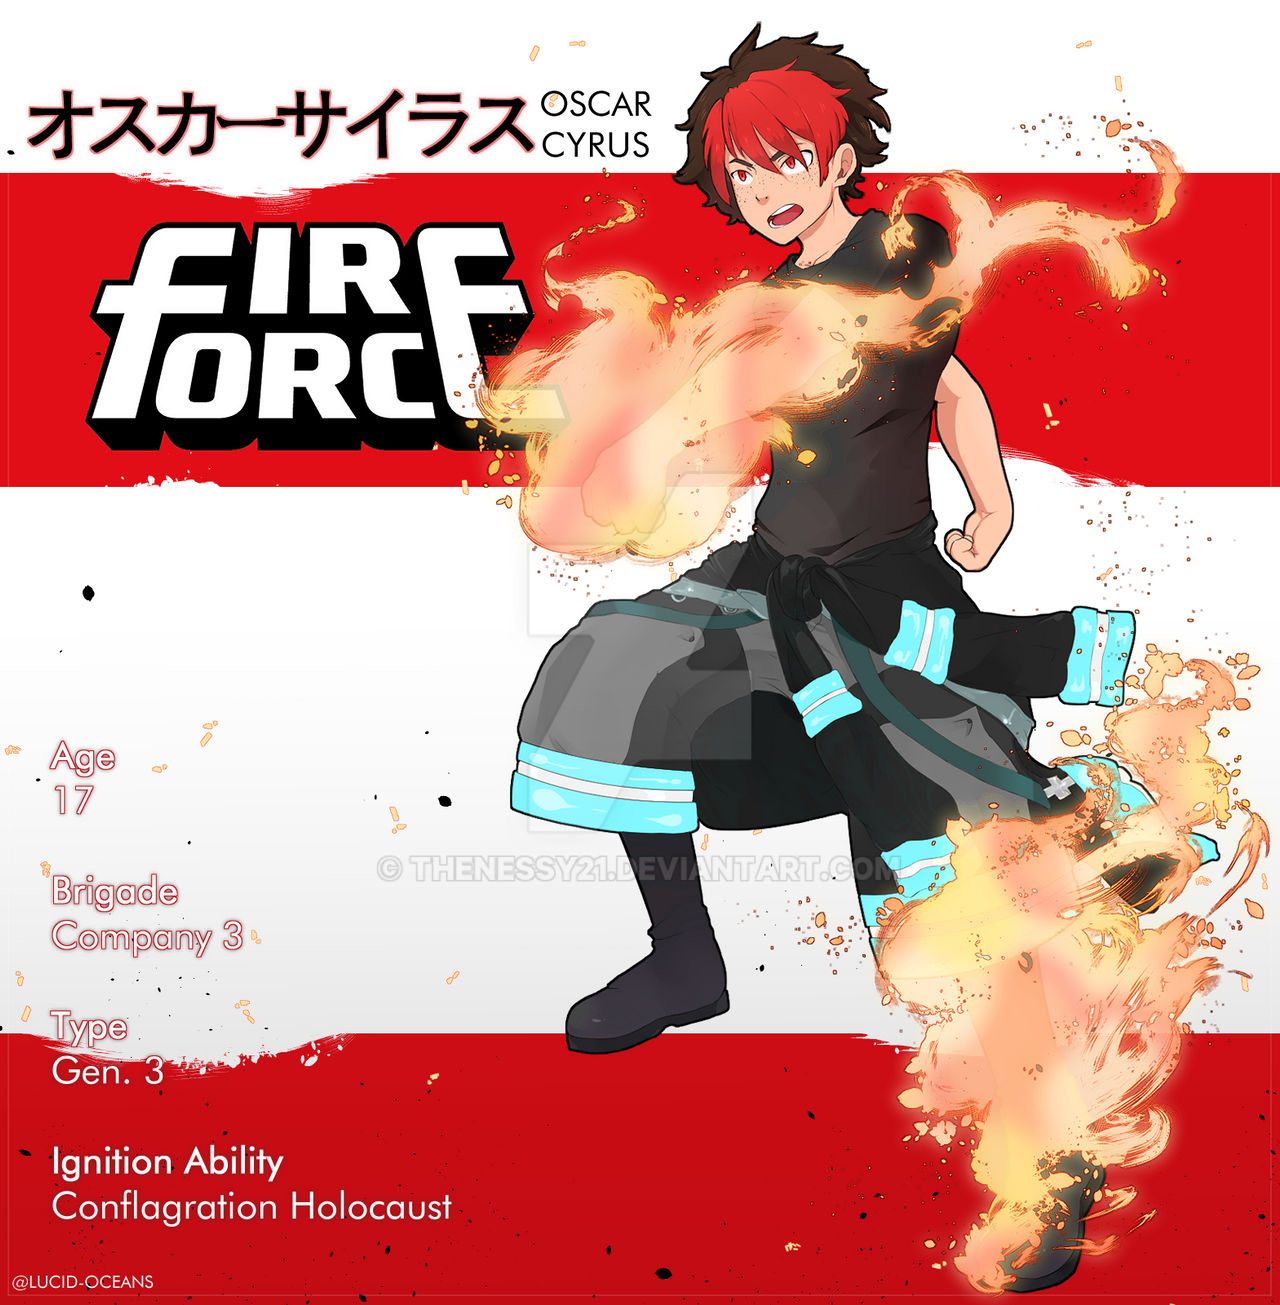 OC] Made a Fire Force OC since I haven't drawn a character in forever! (no  spoilers in the comments please) : r/firebrigade